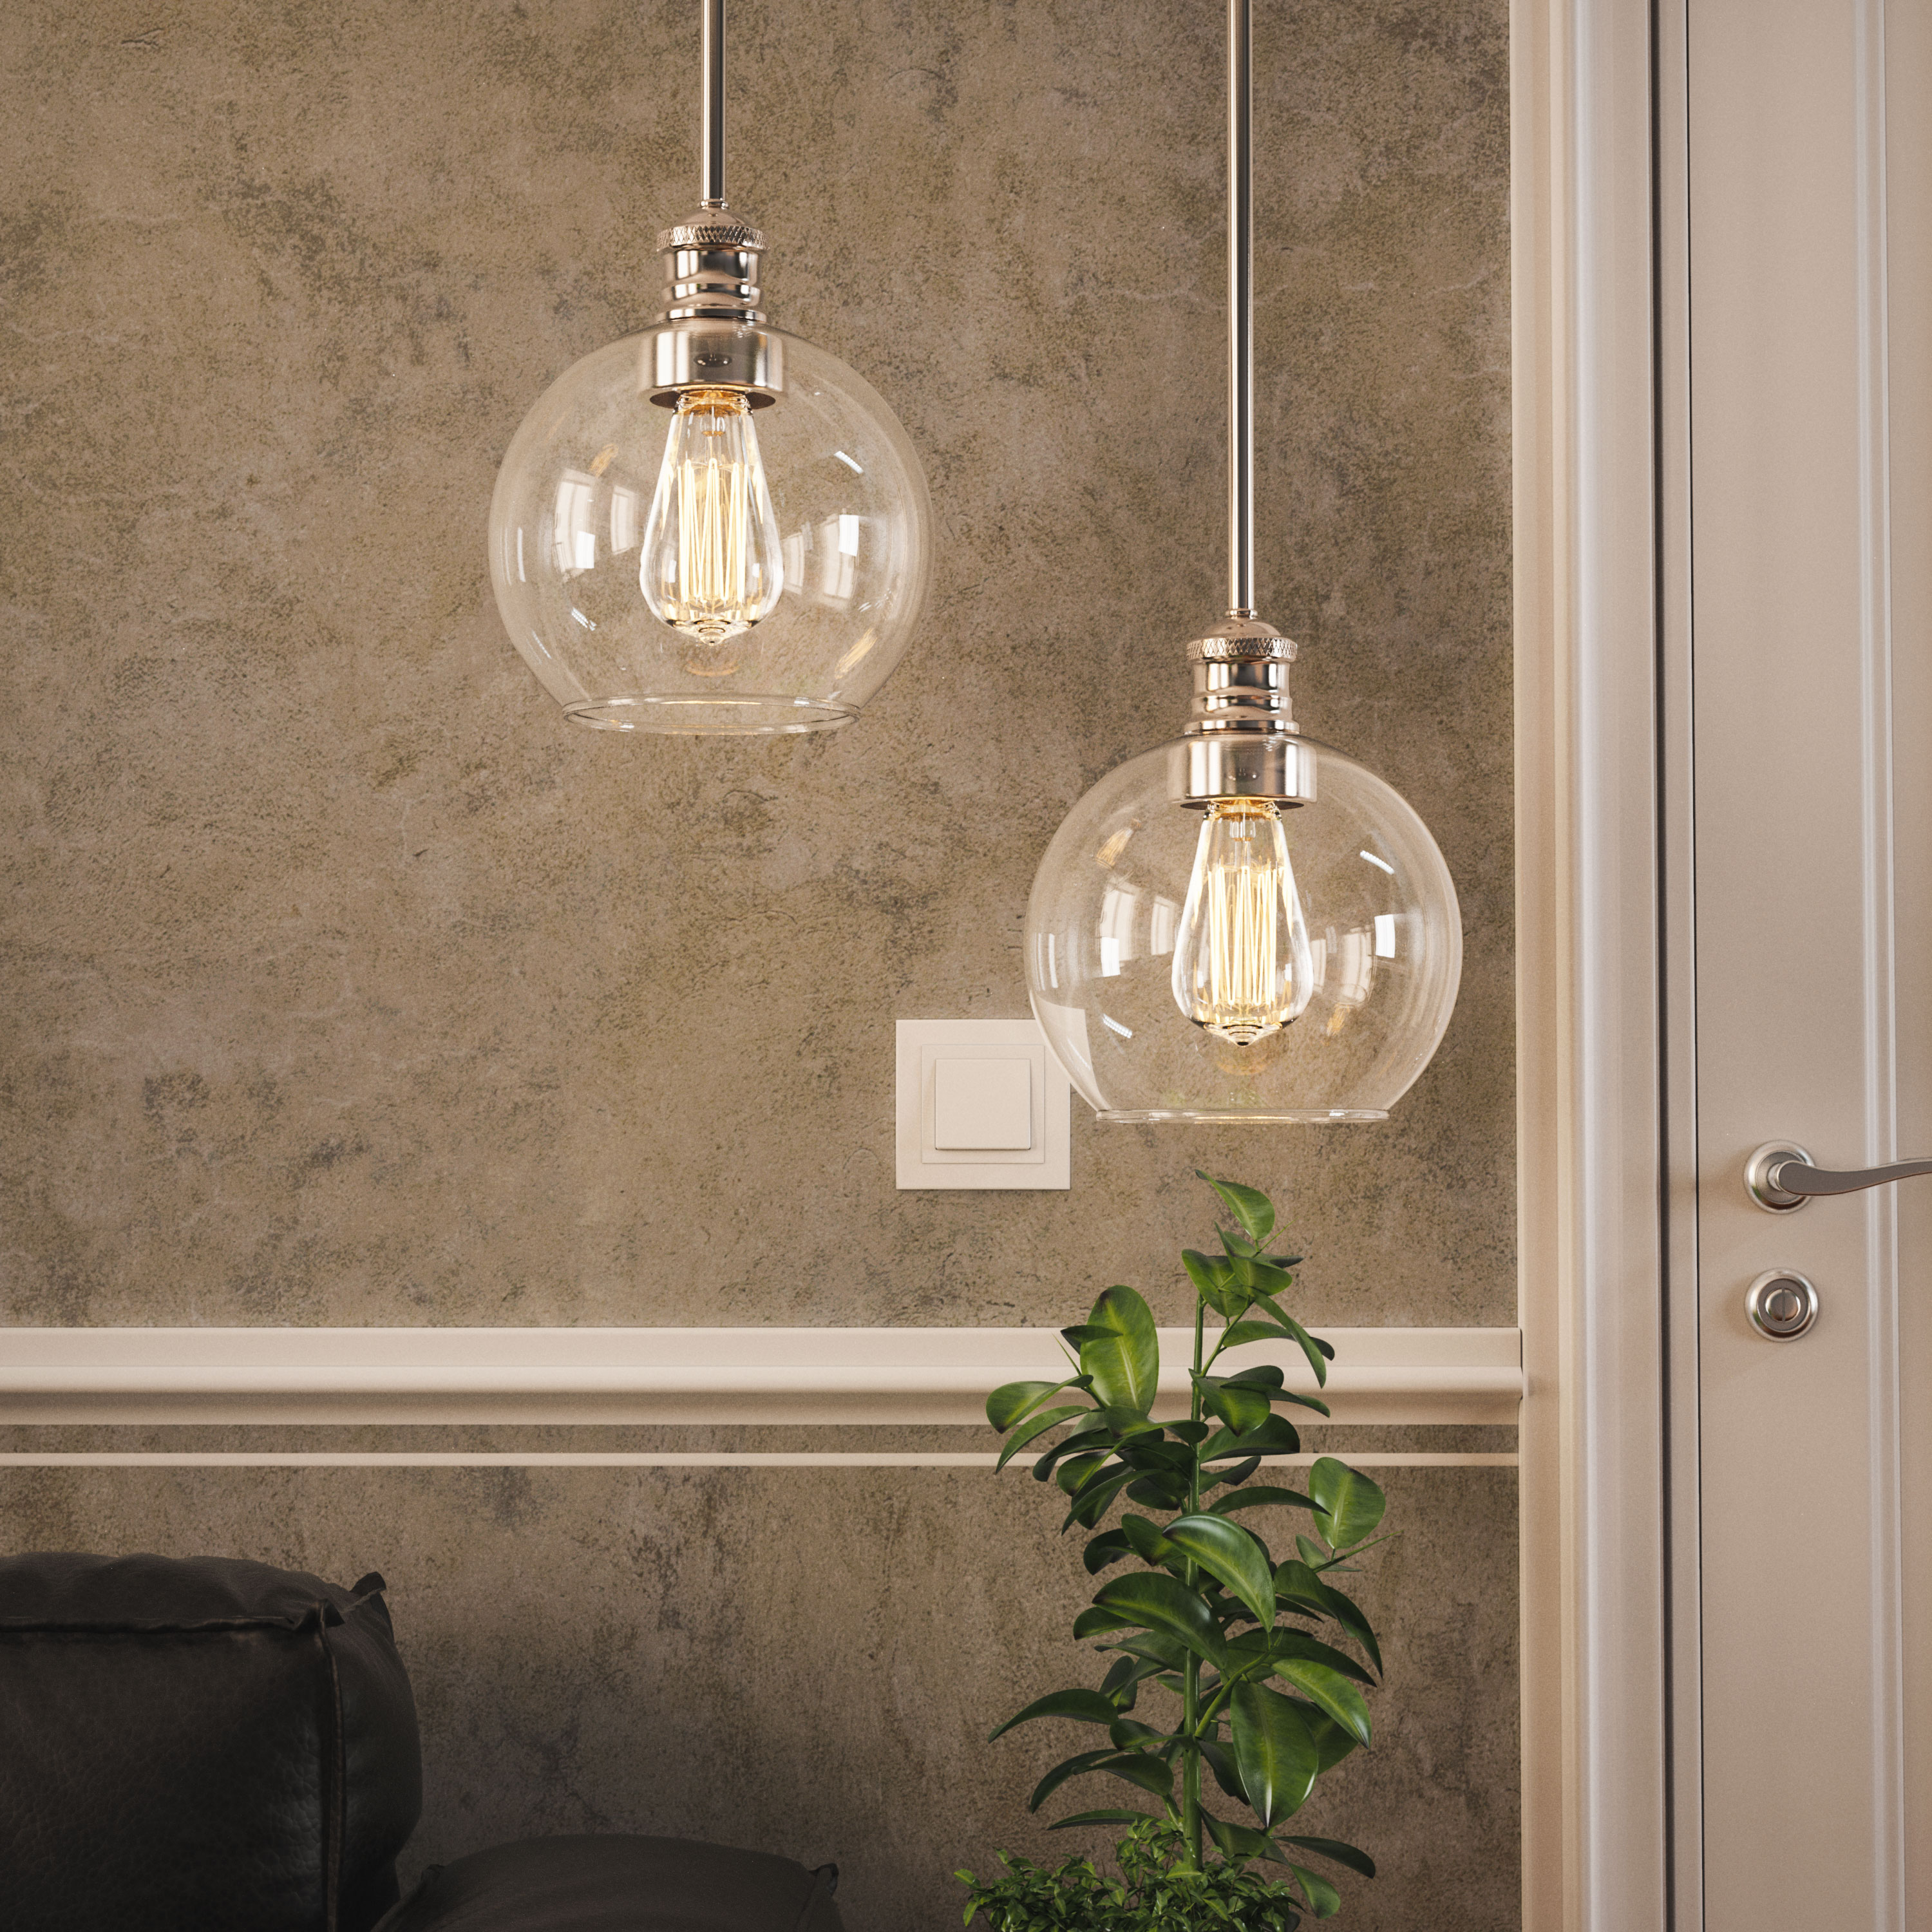 1-Light Clear Glass Pendant Lighting Fixture with Brushed Nickel Finish, E26 Base, UL Listed for Damp Location